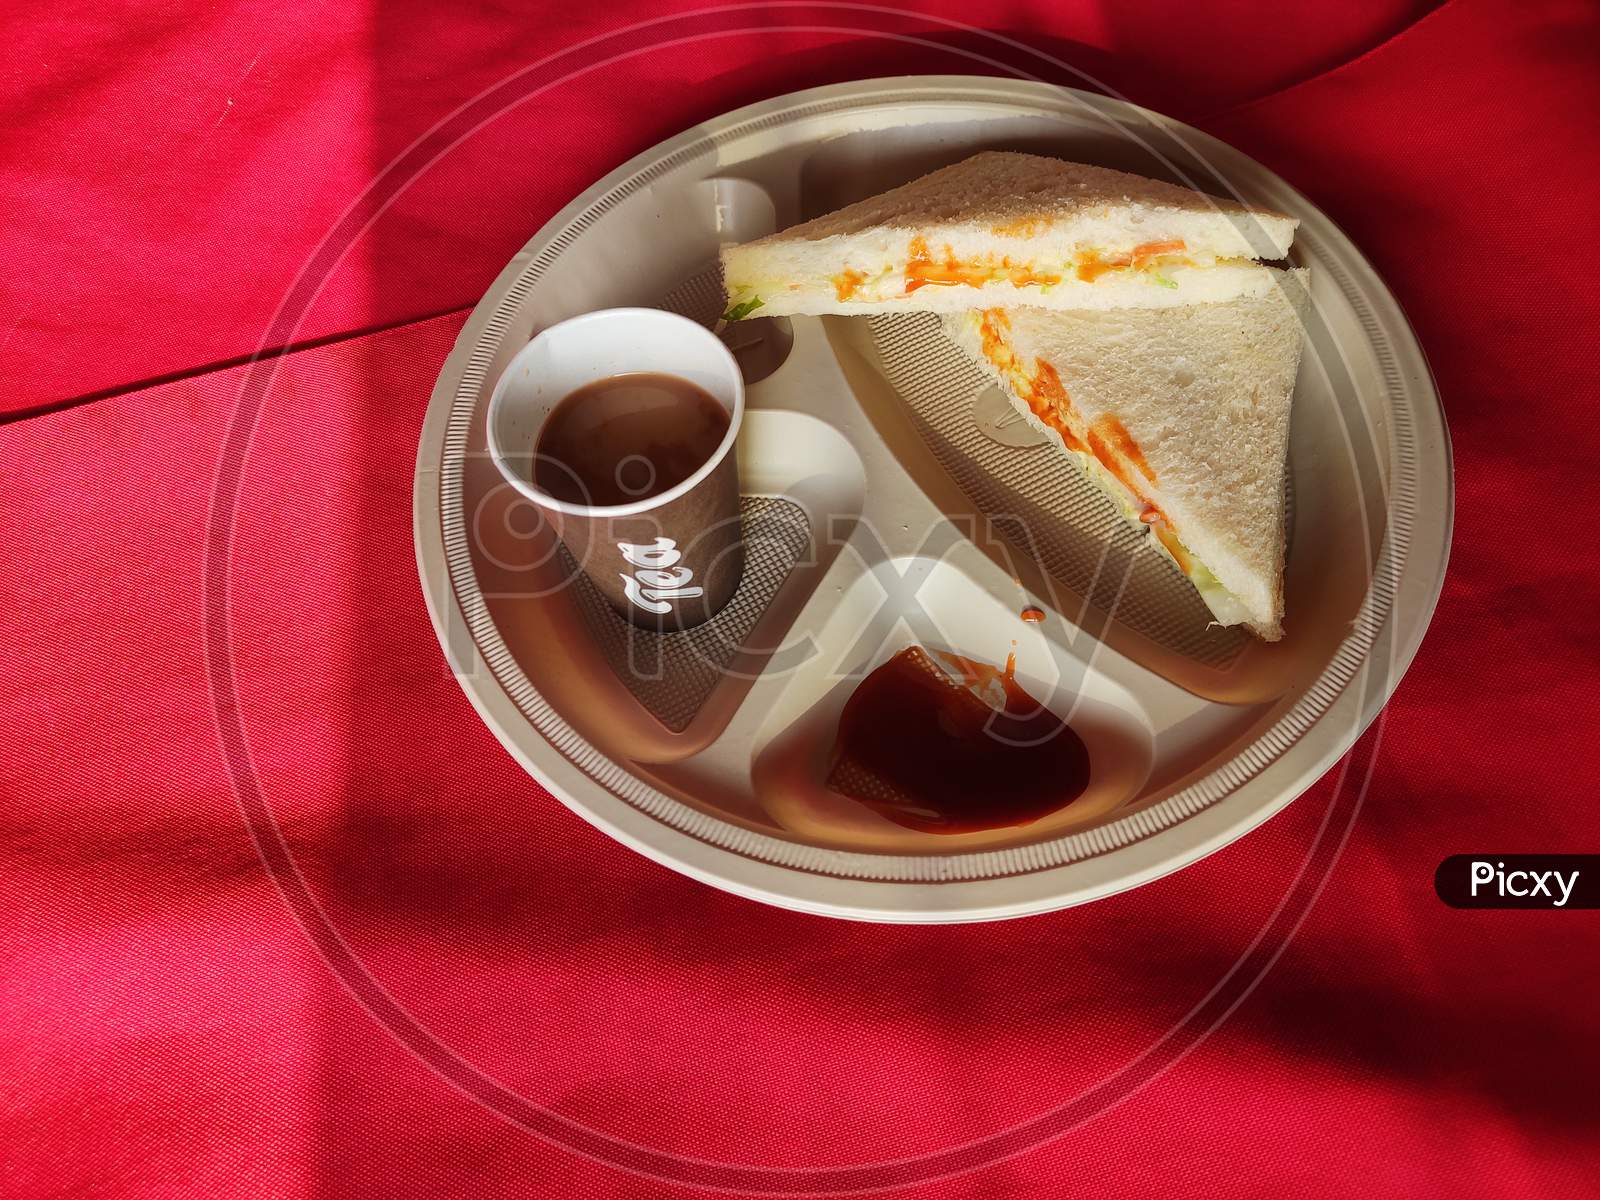 Sandwiches with tomato sauce and a cup of tea in the plate in breakfast